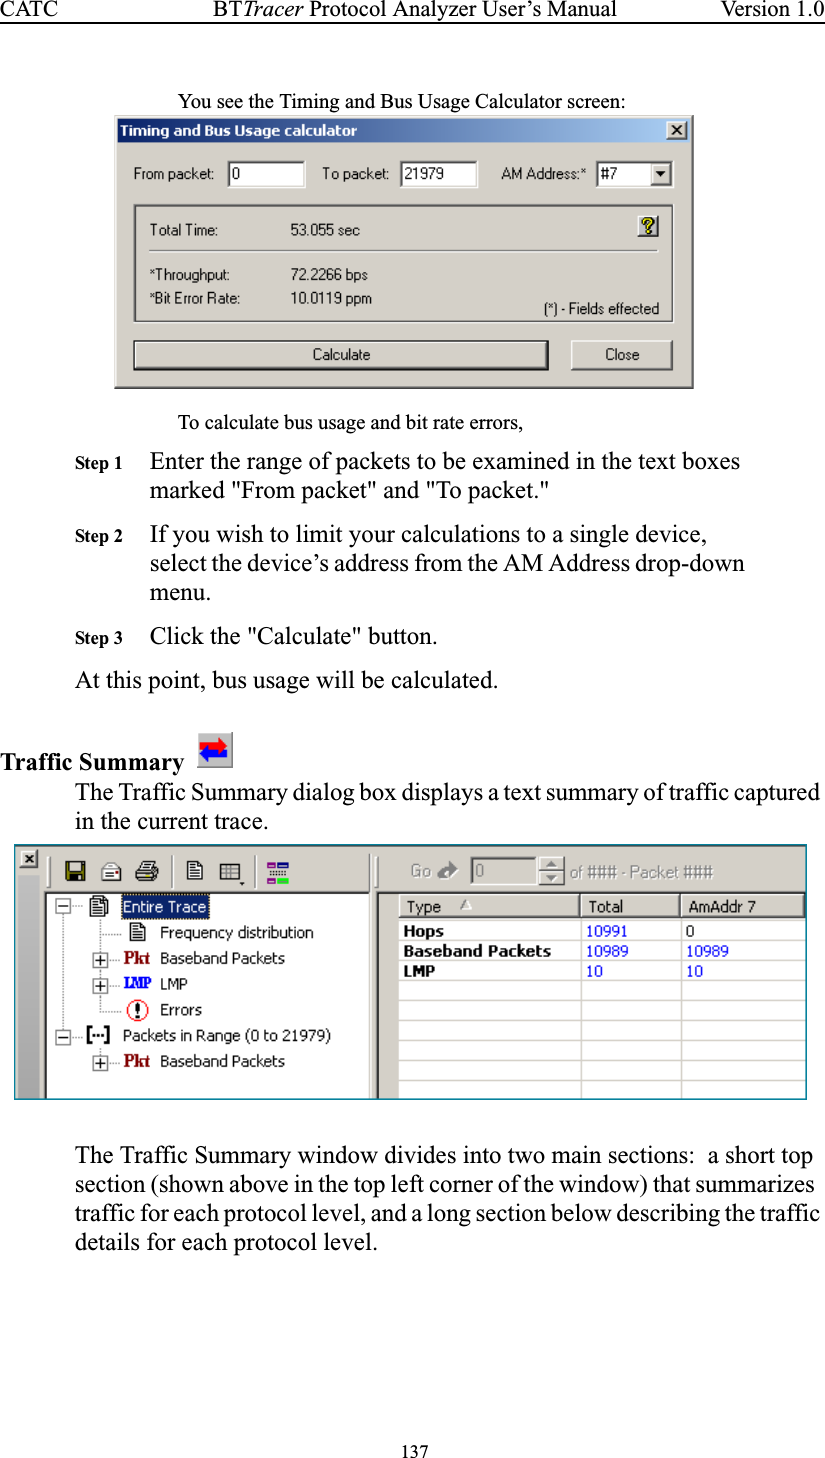 137BTTracer Protocol Analyzer User’s ManualCATC Version 1.0You see the Timing and Bus Usage Calculator screen:To calculate bus usage and bit rate errors,Step 1 Enter the range of packets to be examined in the text boxesmarked &quot;From packet&quot; and &quot;To packet.&quot;Step 2 If you wish to limit your calculations to a single device,select the device’s address from the AM Address drop-downmenu.Step 3 Click the &quot;Calculate&quot; button.At this point, bus usage will be calculated.Traffic SummaryThe Traffic Summary dialog box displays a text summary of traffic capturedin the current trace.The Traffic Summary window divides into two main sections: a short topsection (shown above in the top left corner of the window) that summarizestraffic for each protocol level, and a long section below describing the trafficdetails for each protocol level.